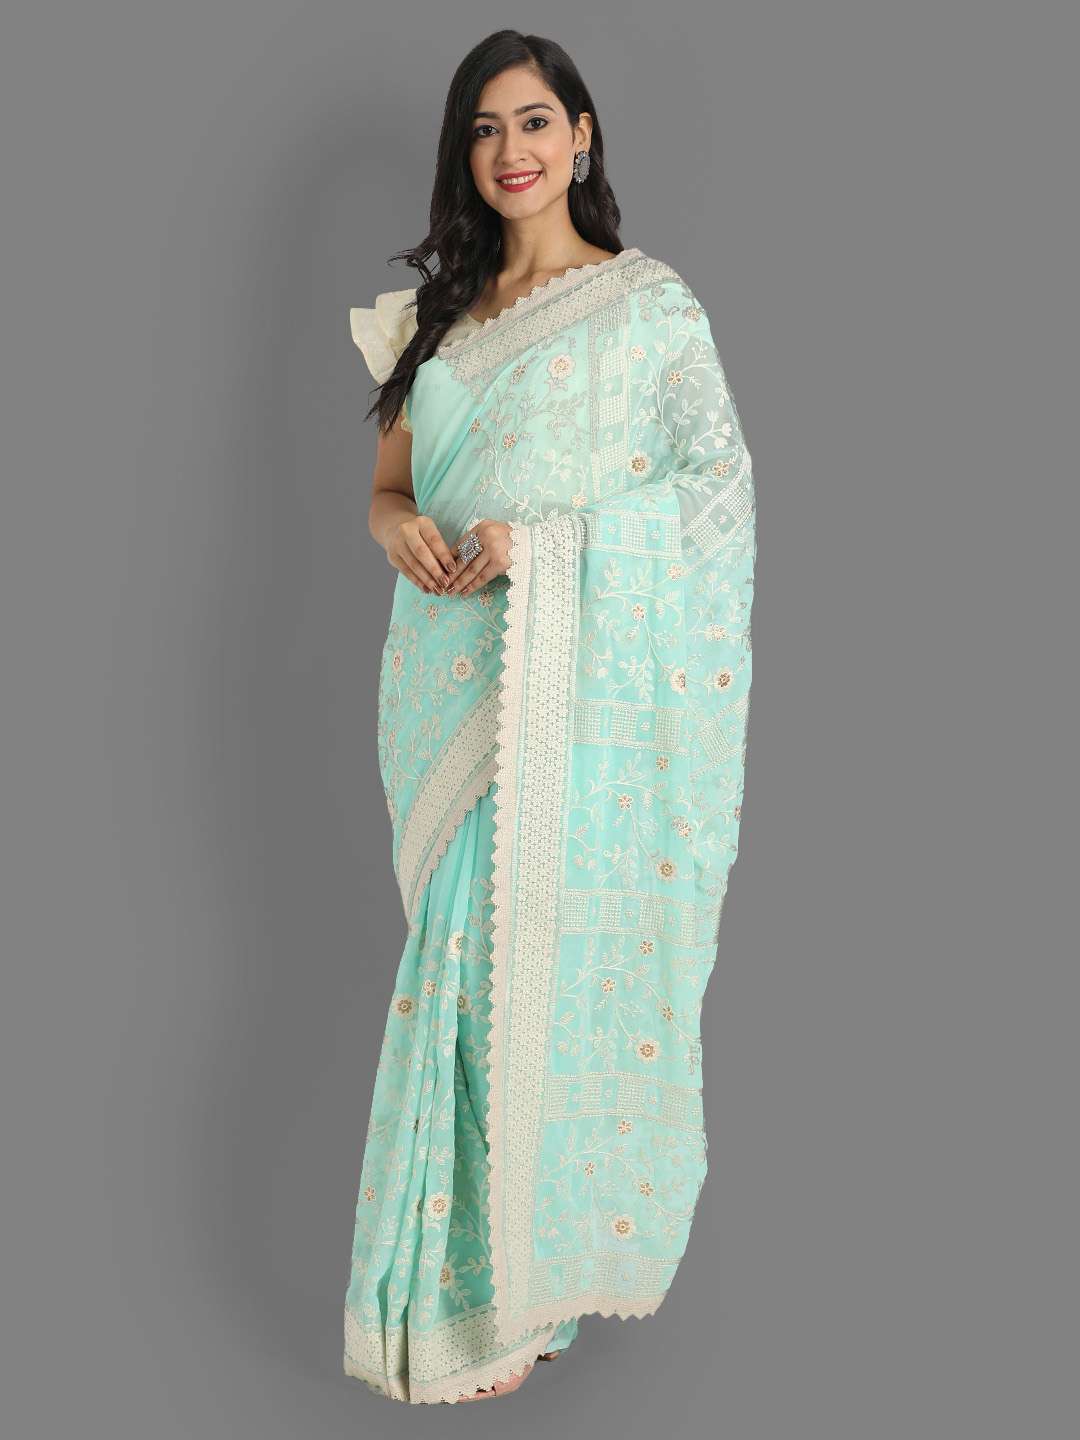 FAUX GEORGETTE LATEST PARTY WEAR RICH LOOK SAREE AT WHOLESAL...